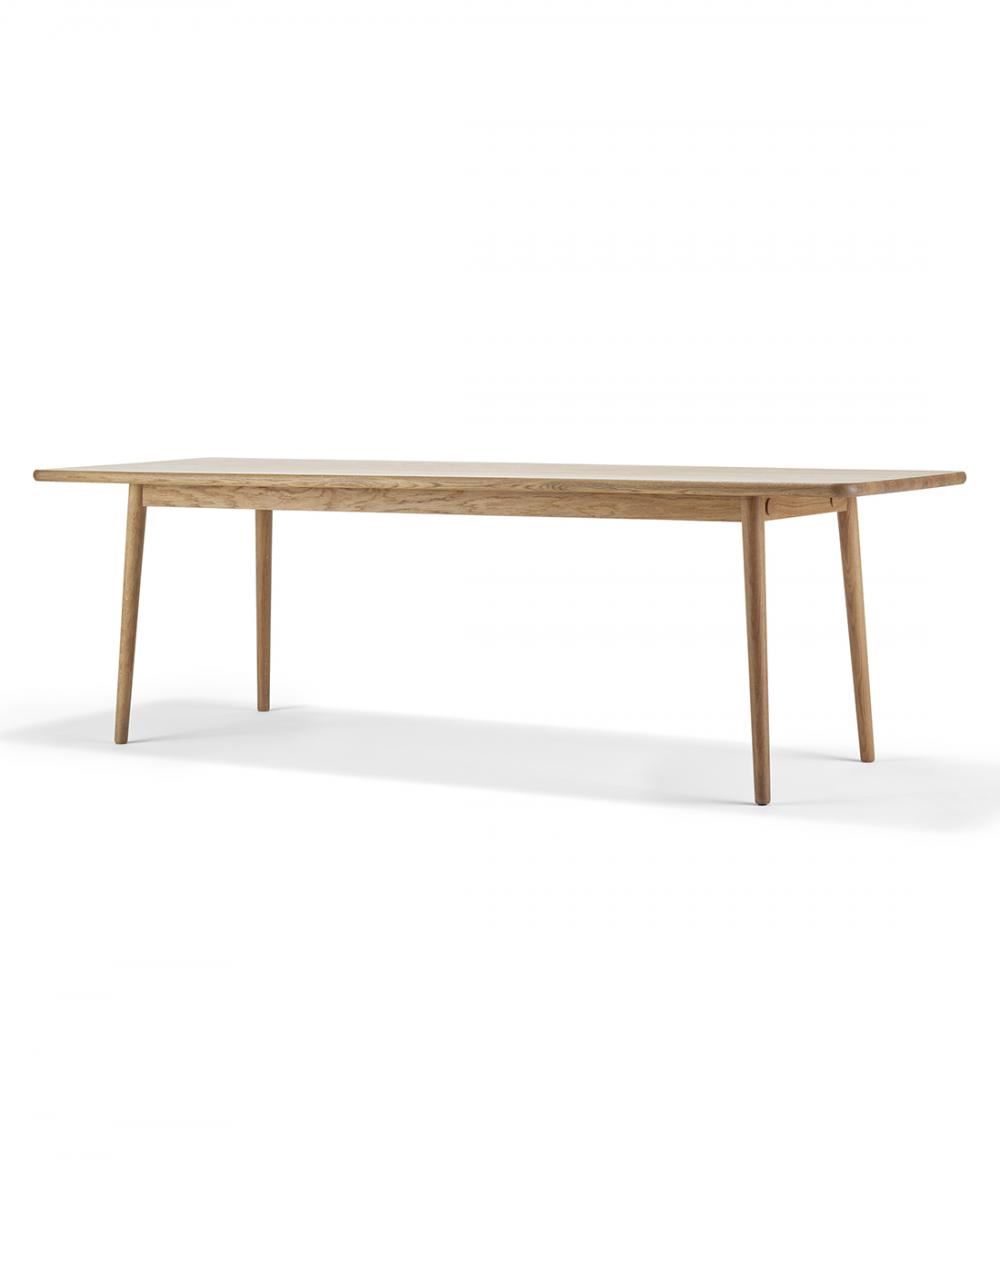 Stolab Miss Holly Table Rectangular Birch 175 X 82cm With 1 Extension Plate Light Wood Designer Furniture From Holloways Of Ludlow